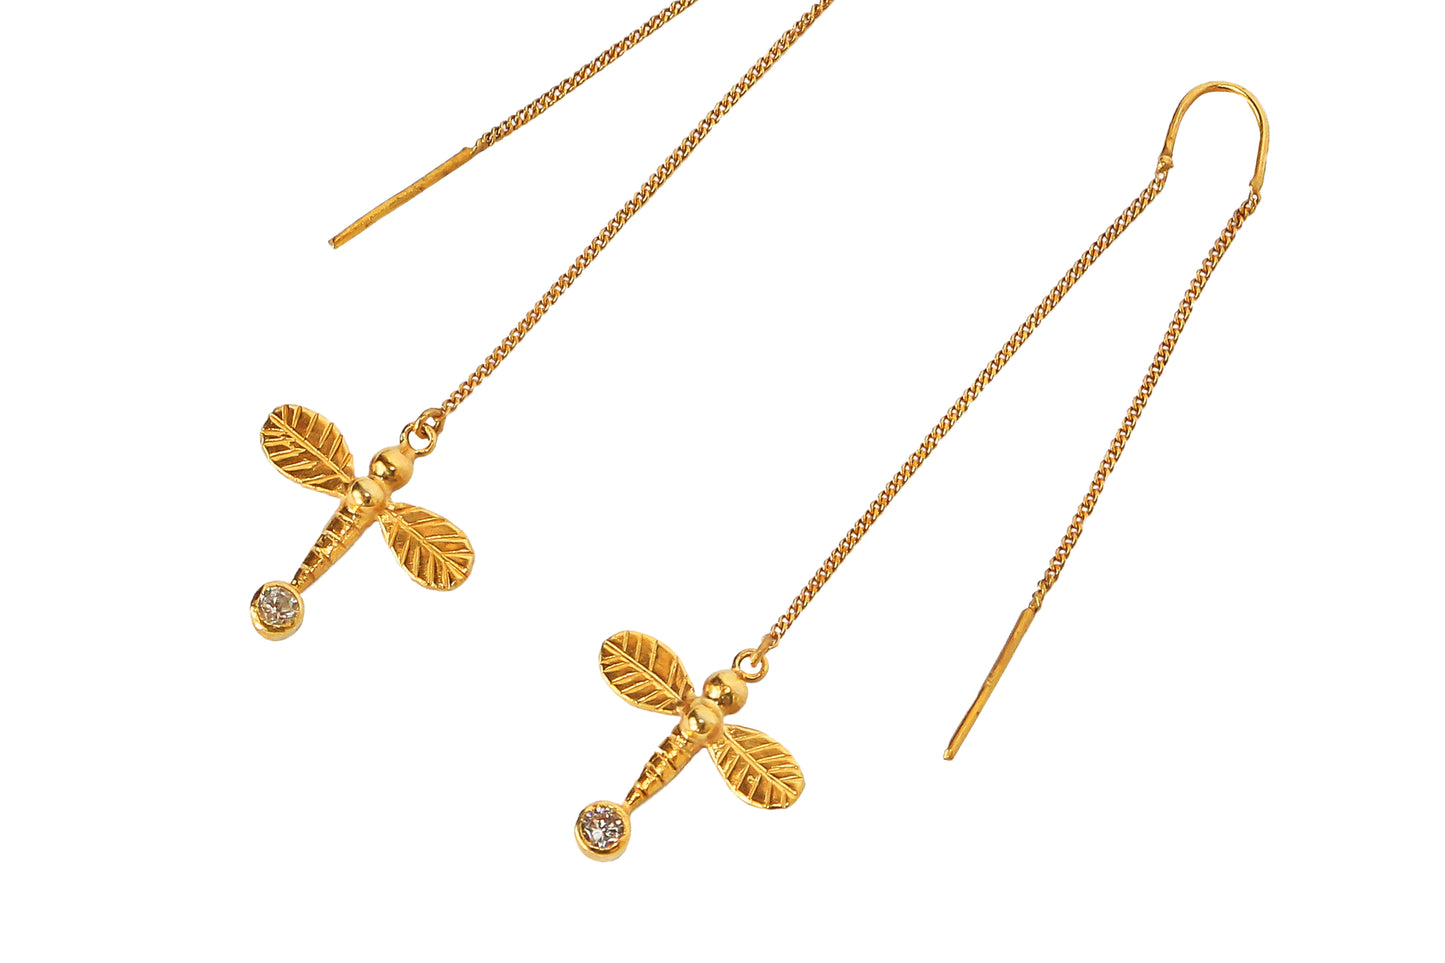 Dragonfly jewellery details